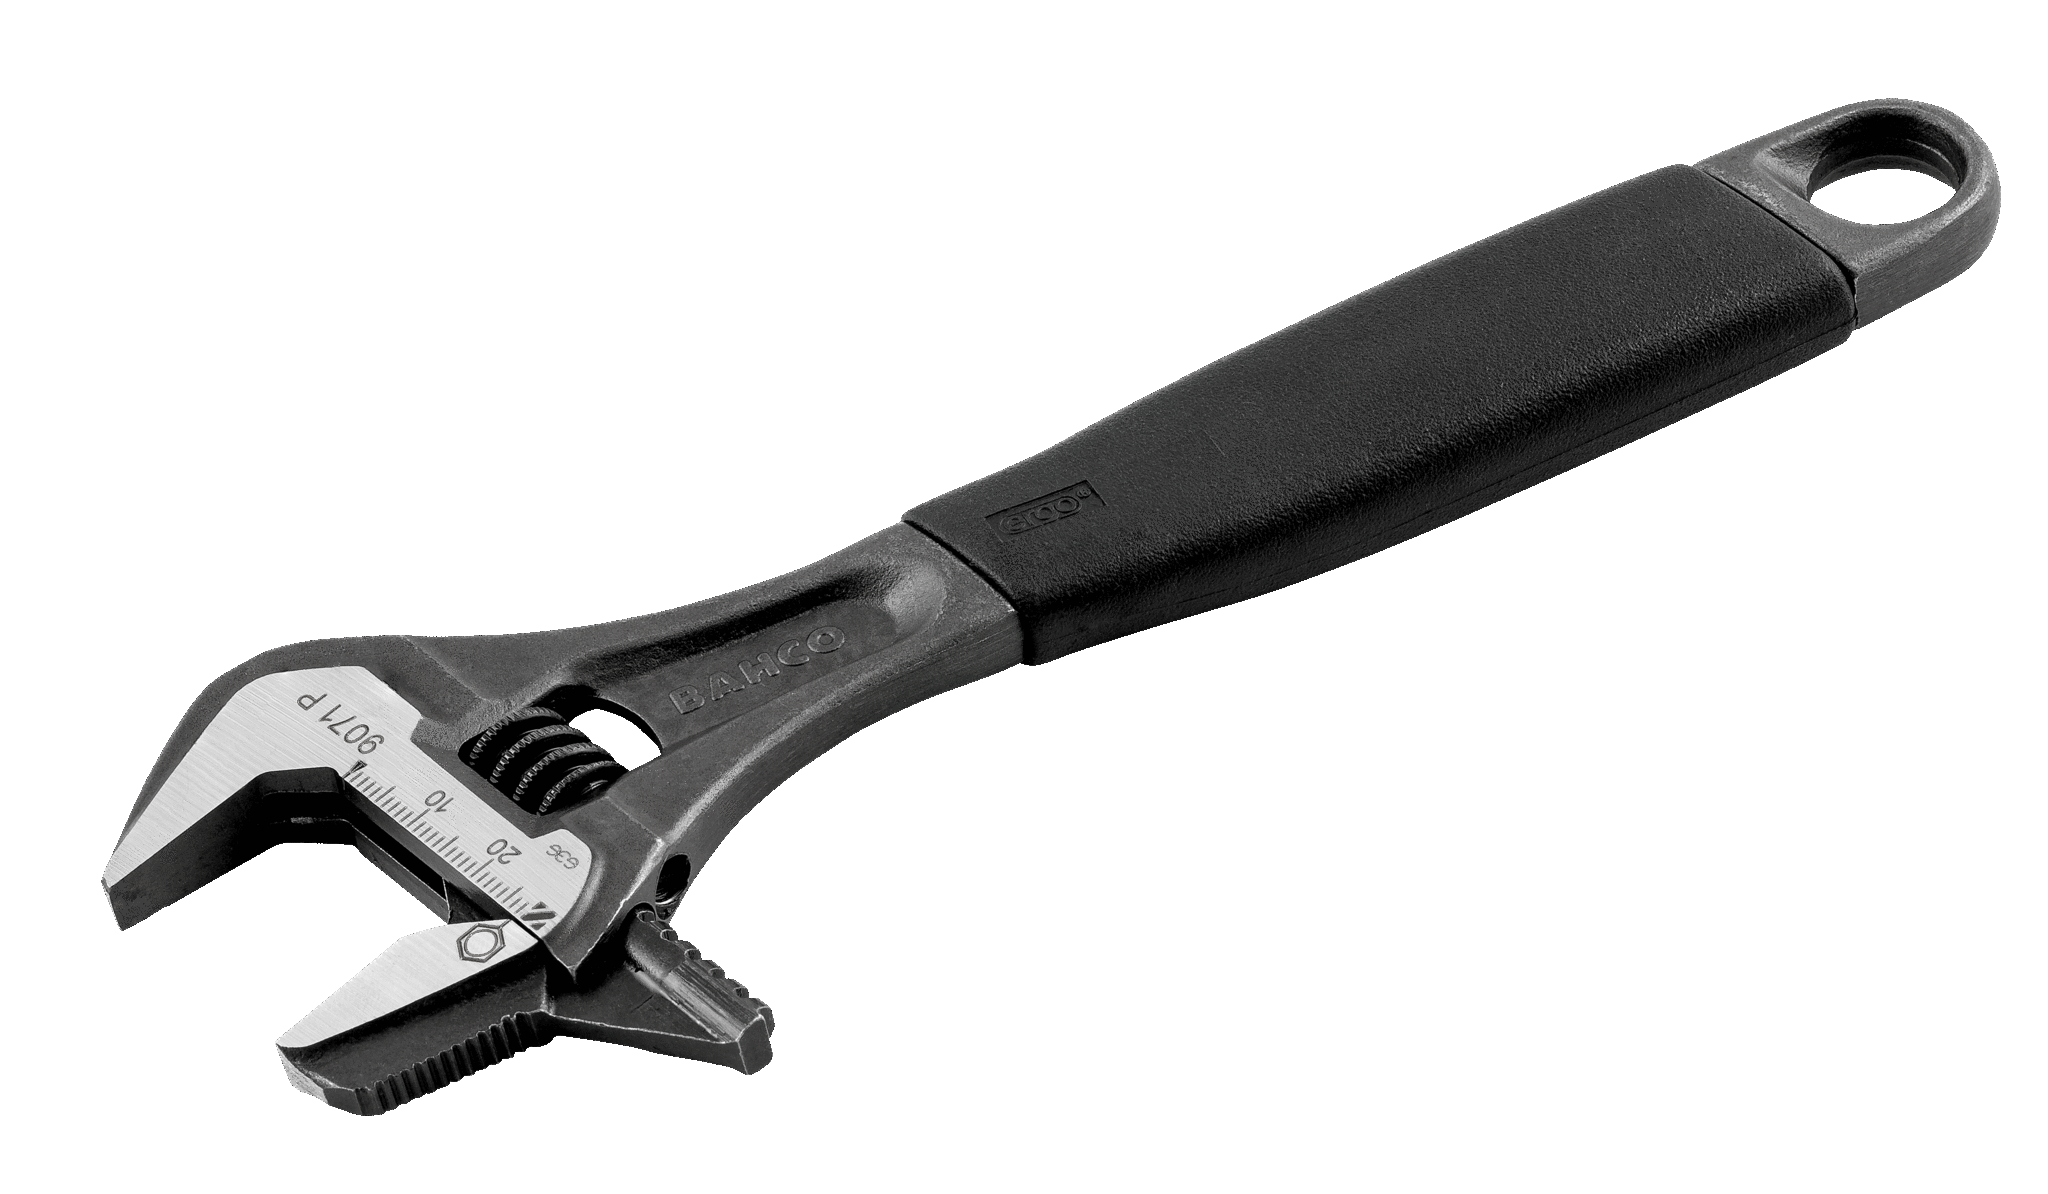 ERGO™ rubber handle central nut phosphated adjustable wrench, with reversible jaw - 9072 P by Bahco